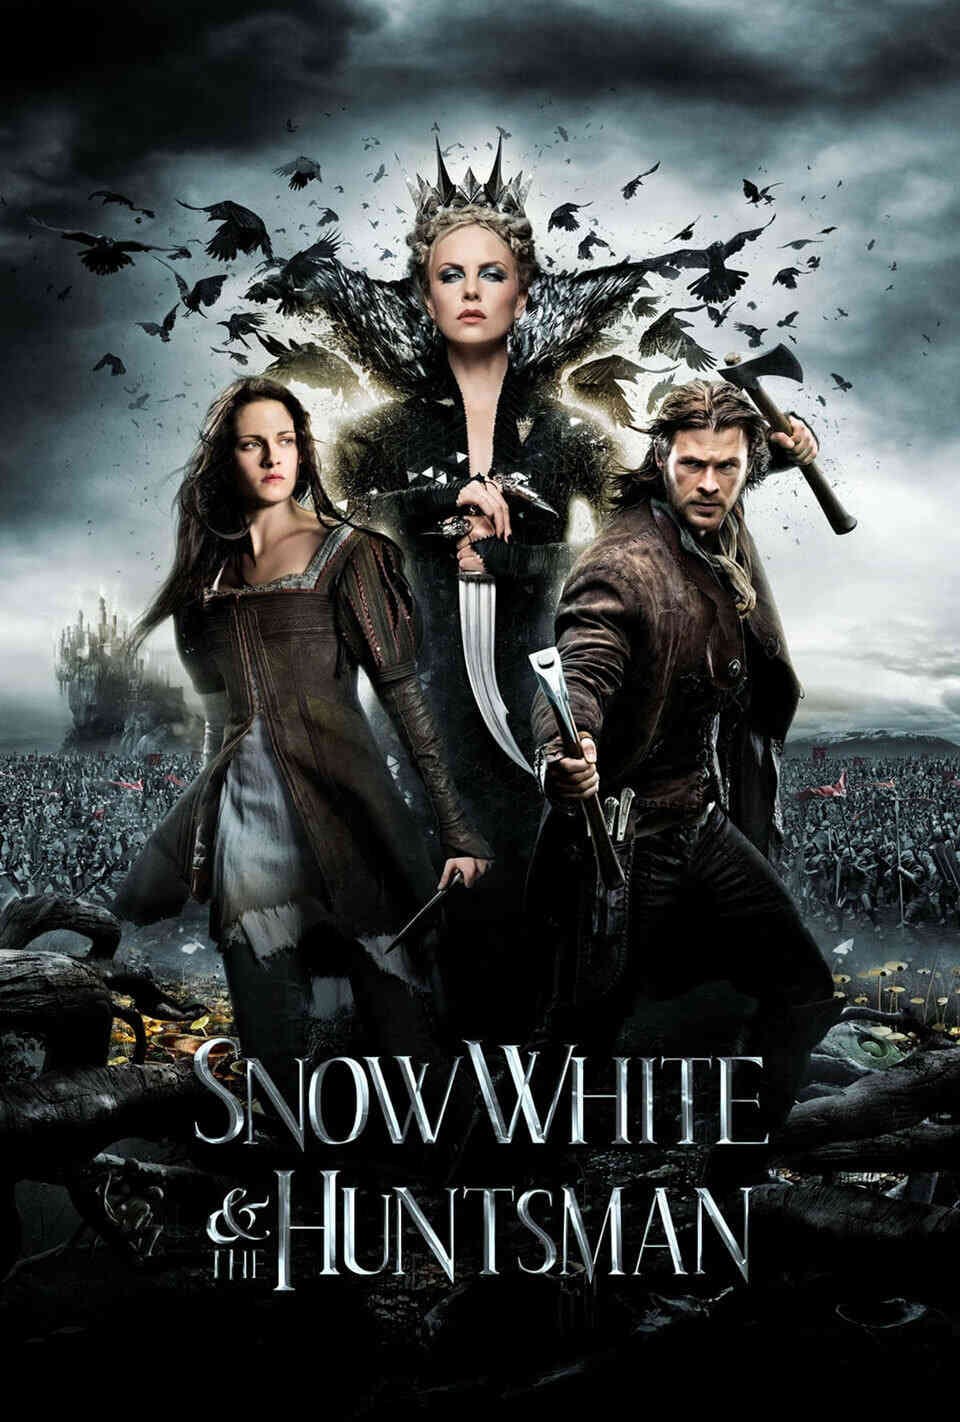 Read Snow White and the Huntsman screenplay.